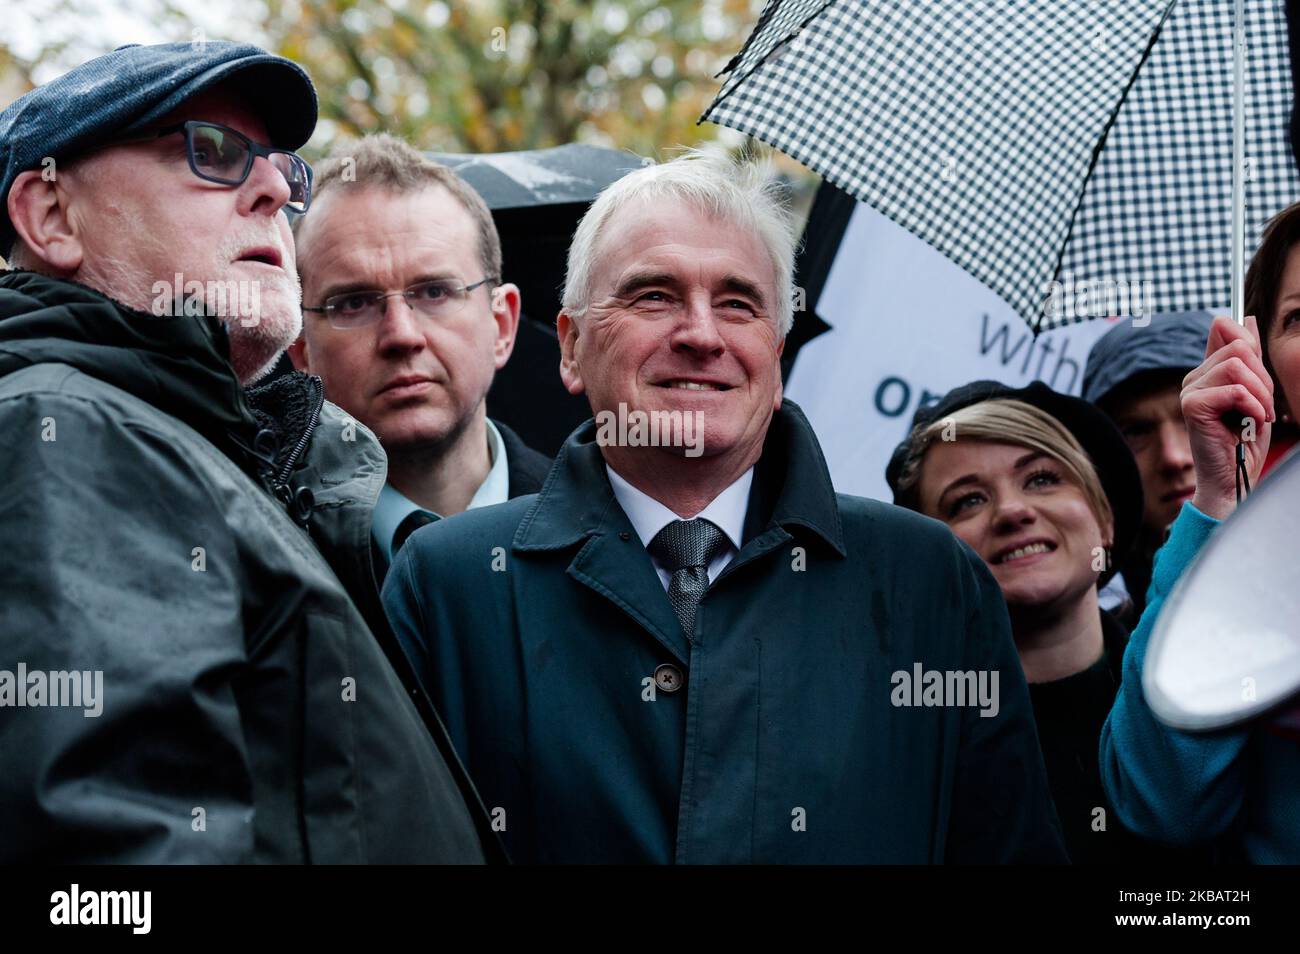 Shadow Chancellor John McDonnell takes part in a rally as McDonald's employees, trade unionists and campaigners for fast food workers' rights gather outside Downing Street on 12 November, 2019 in London, England. Members of the Bakers, Food and Allied Workers Union (BFAWU) walked out of six McDonald's stores in London today over a ?15 an hour minimum wage, choice of guaranteed working hours and union rights. (Photo by WIktor Szymanowicz/NurPhoto) Stock Photo